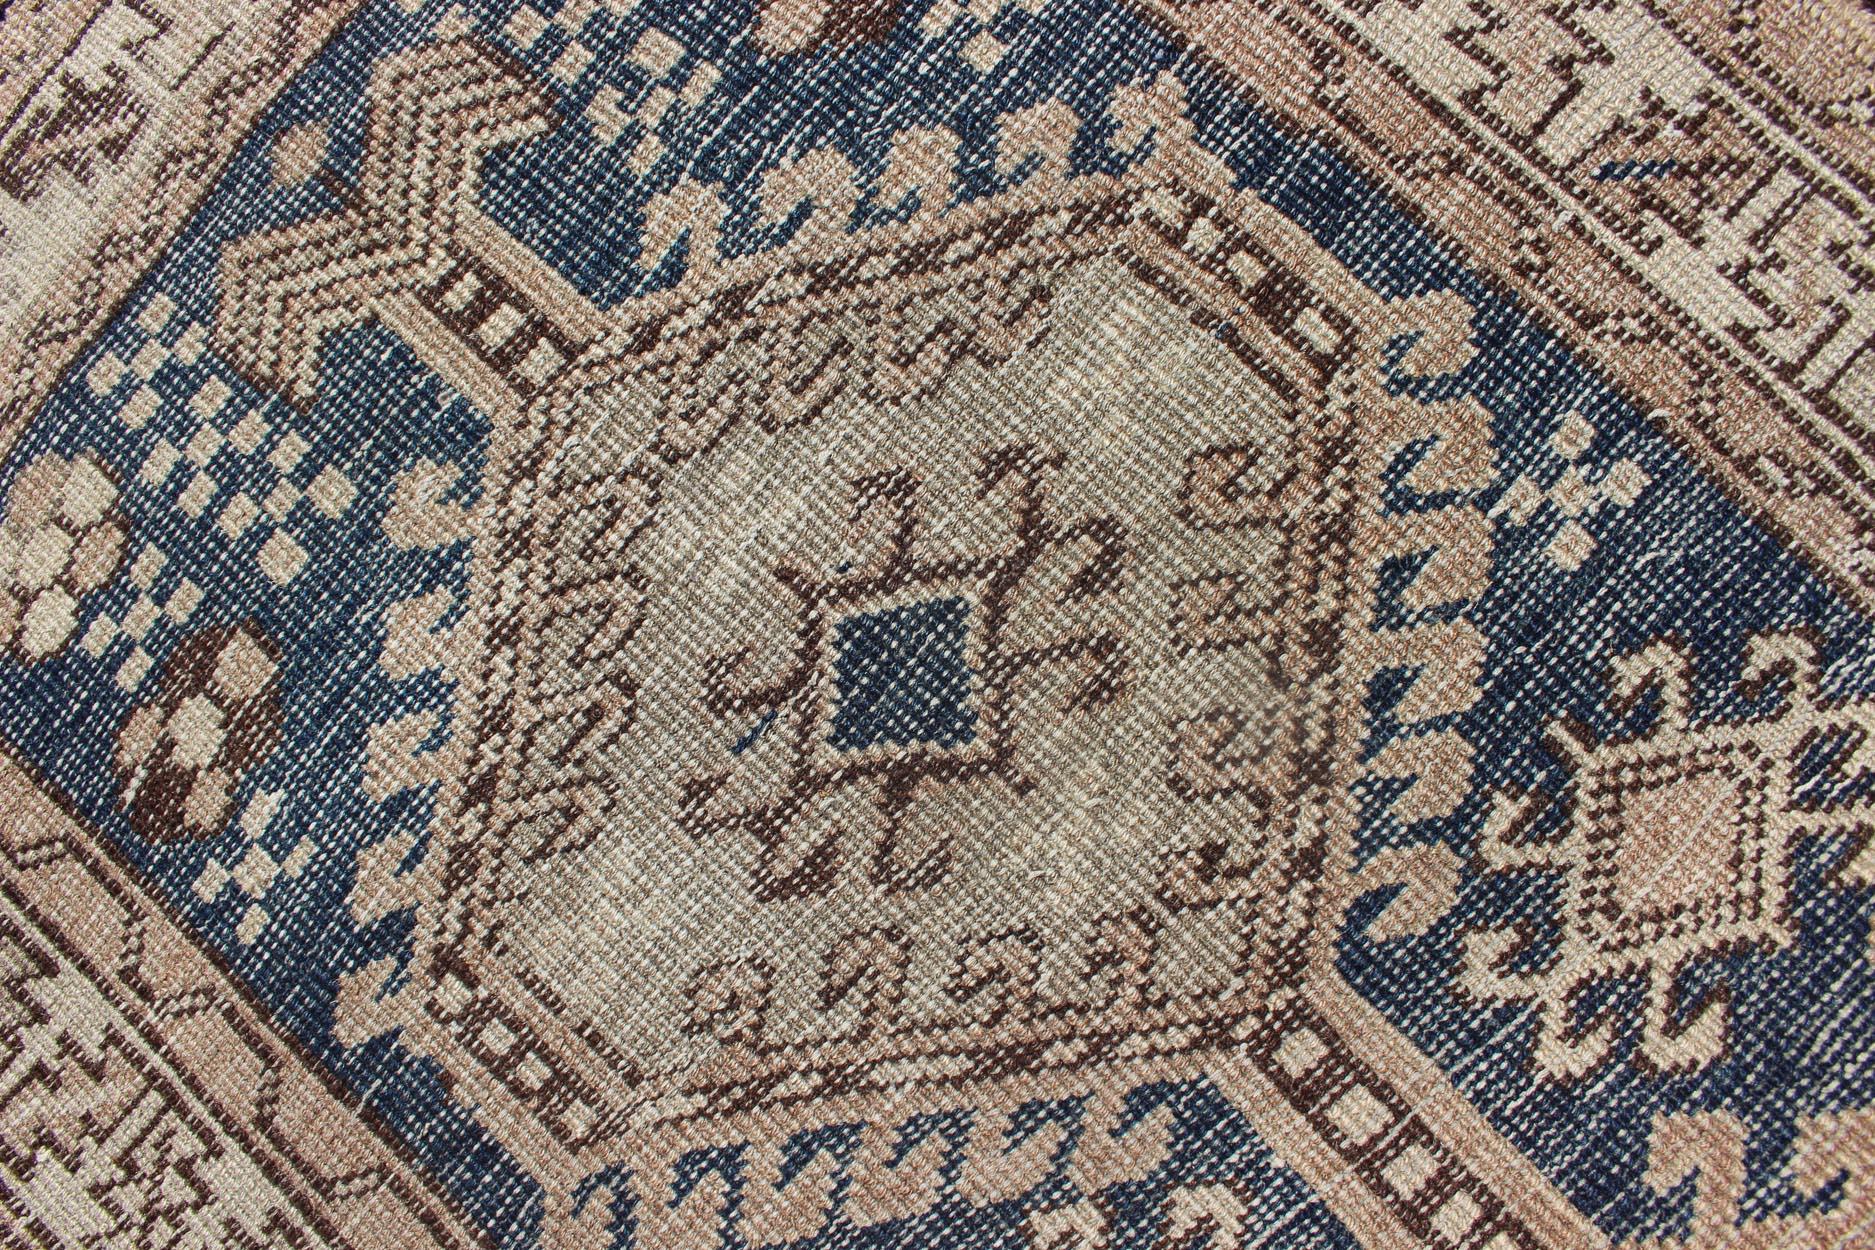 Antique Blue Tribal Karajeh Runner With Navy Blue, Brown and Earth Tones For Sale 3